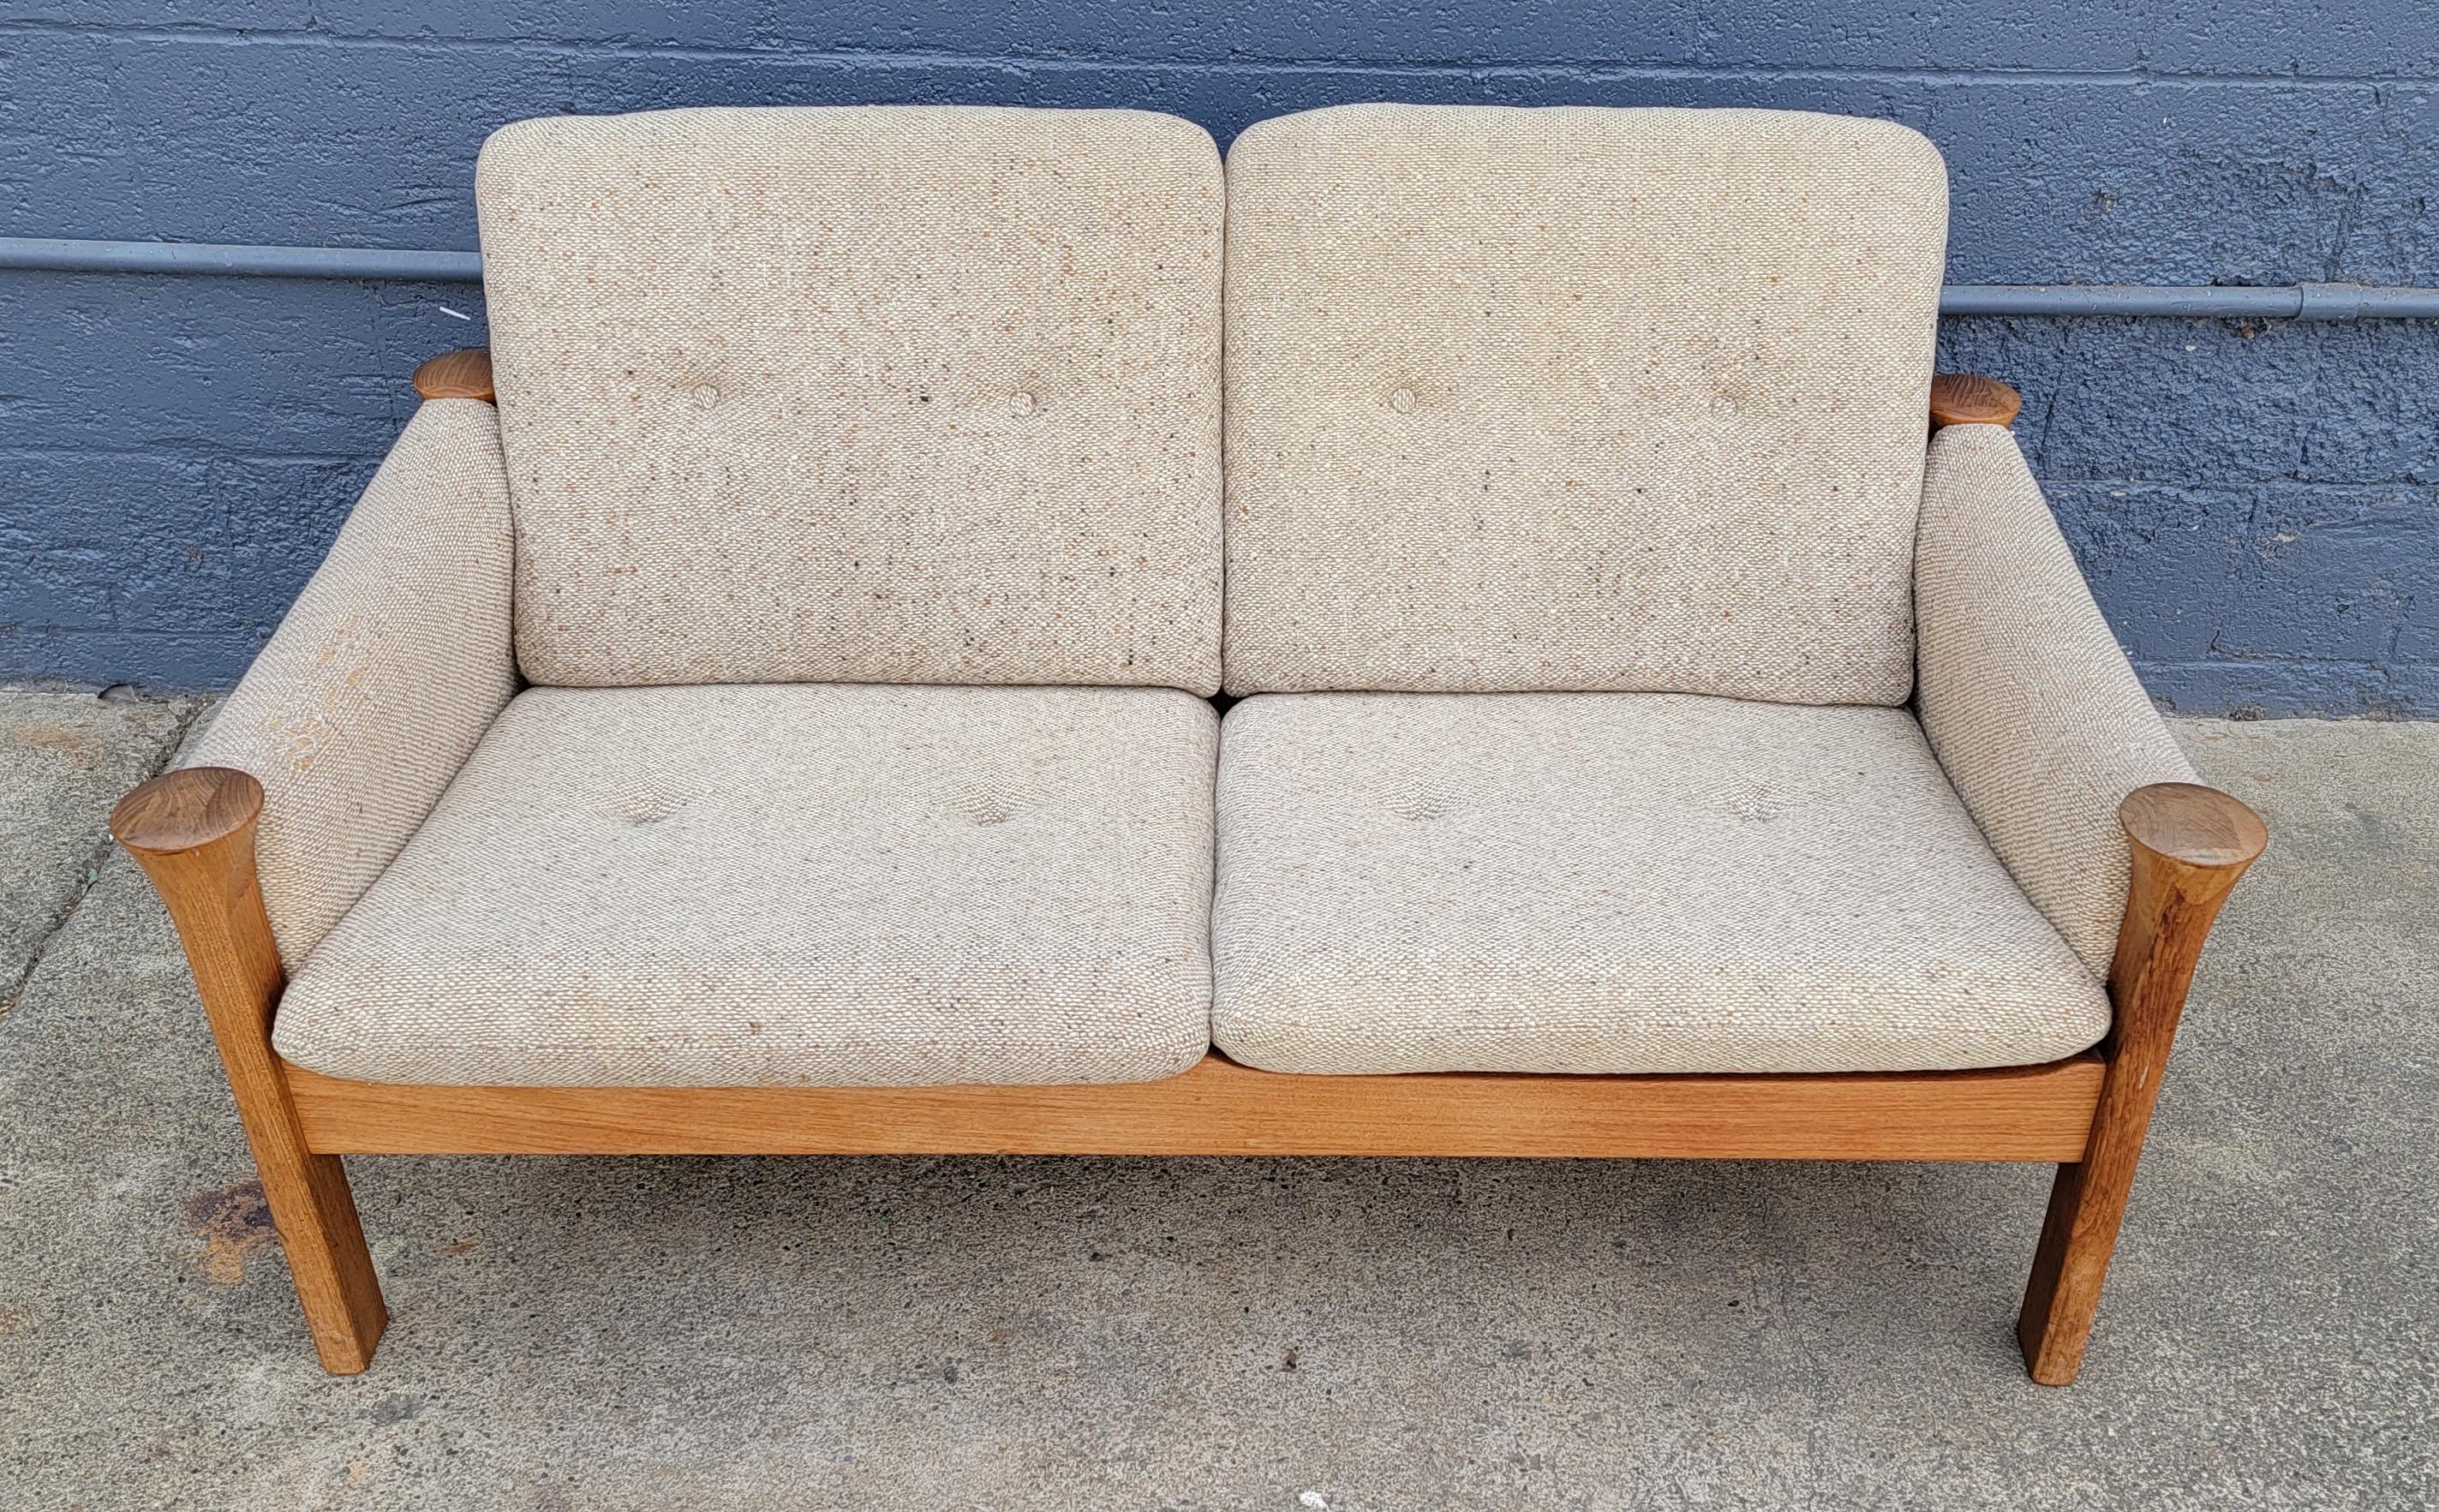 Two seat sofa designed by Arne Vodder for Cado. Made in Denmark 1970's. Substantial, solid teak frame. Reversible seat cushions. Retains 